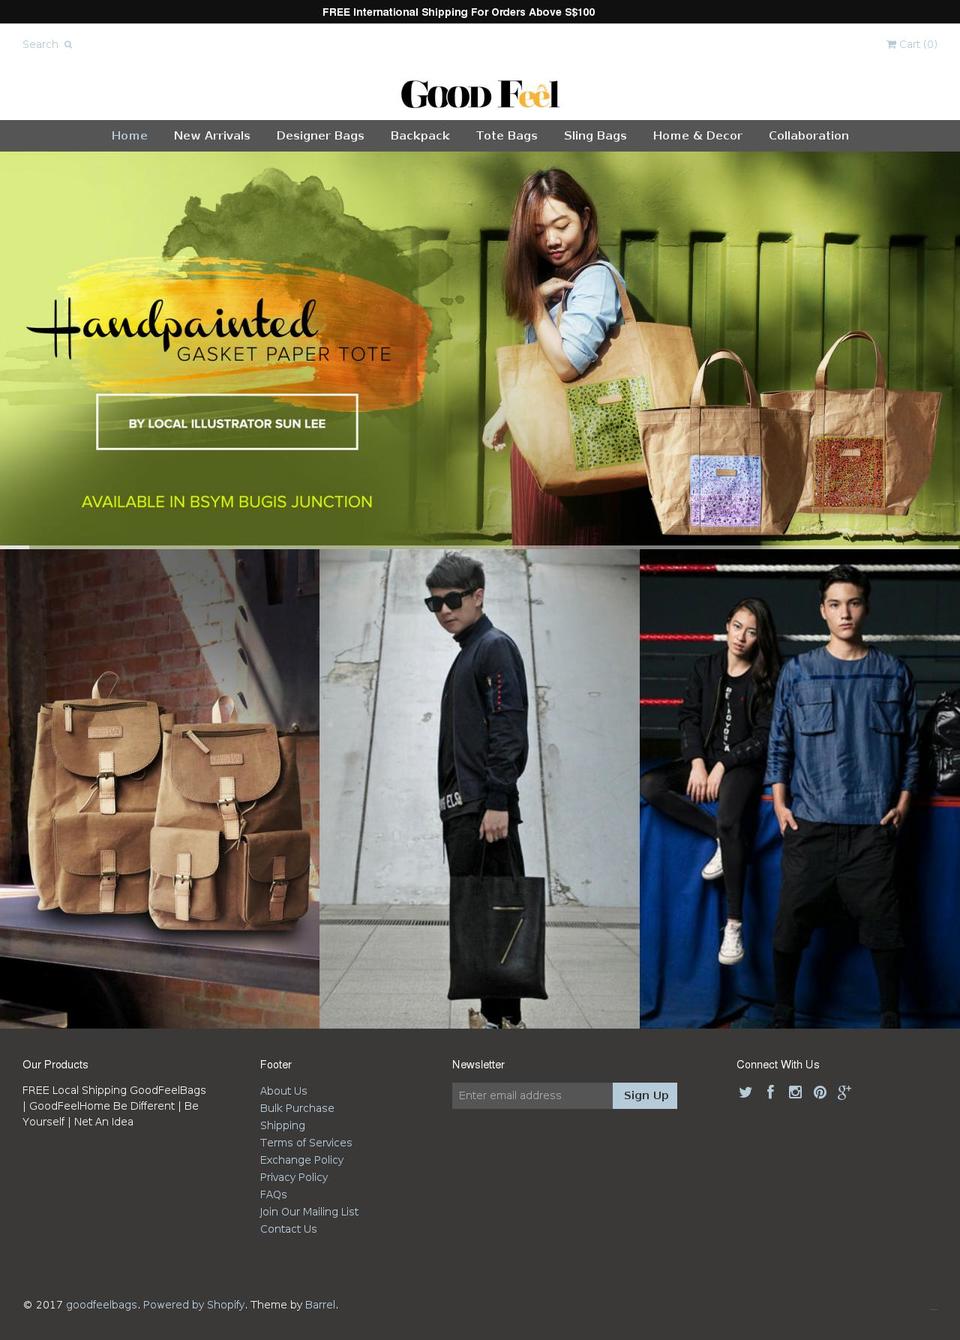 Weekend Shopify theme site example goodfeelbags.com